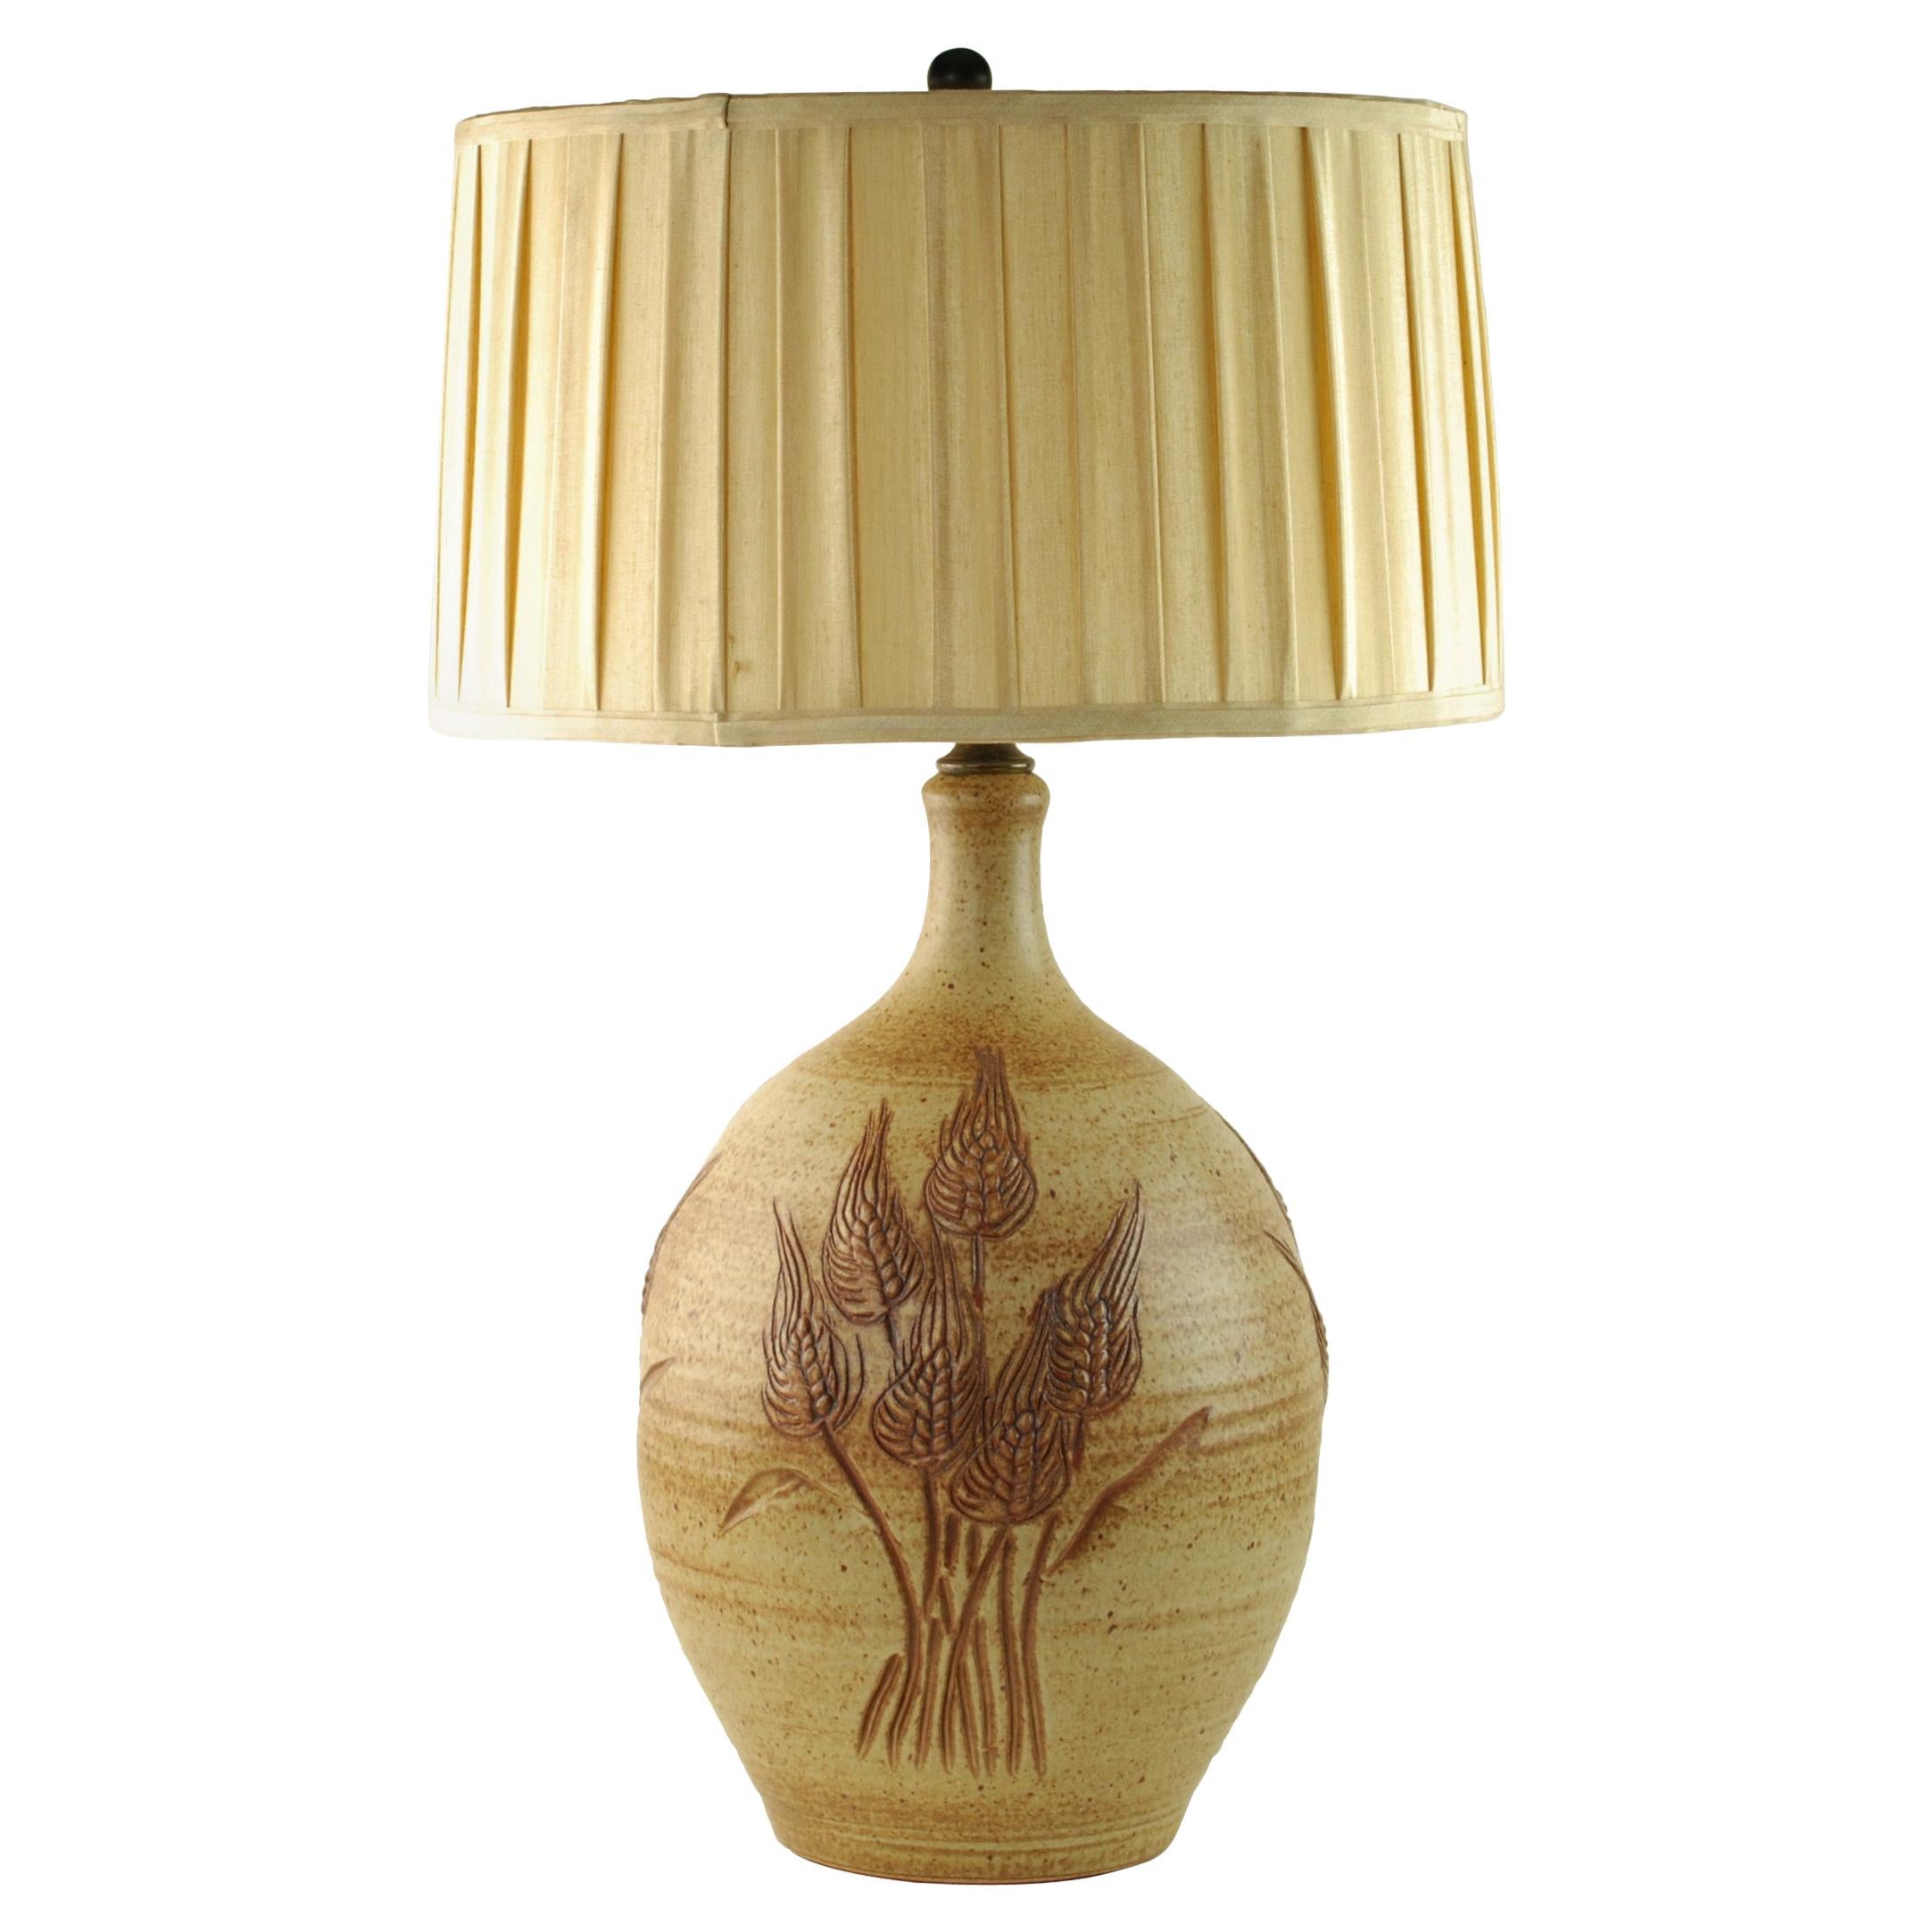 Wishon-Harrell Stoneware Table Lamp with Hand Carved Wheat Motif